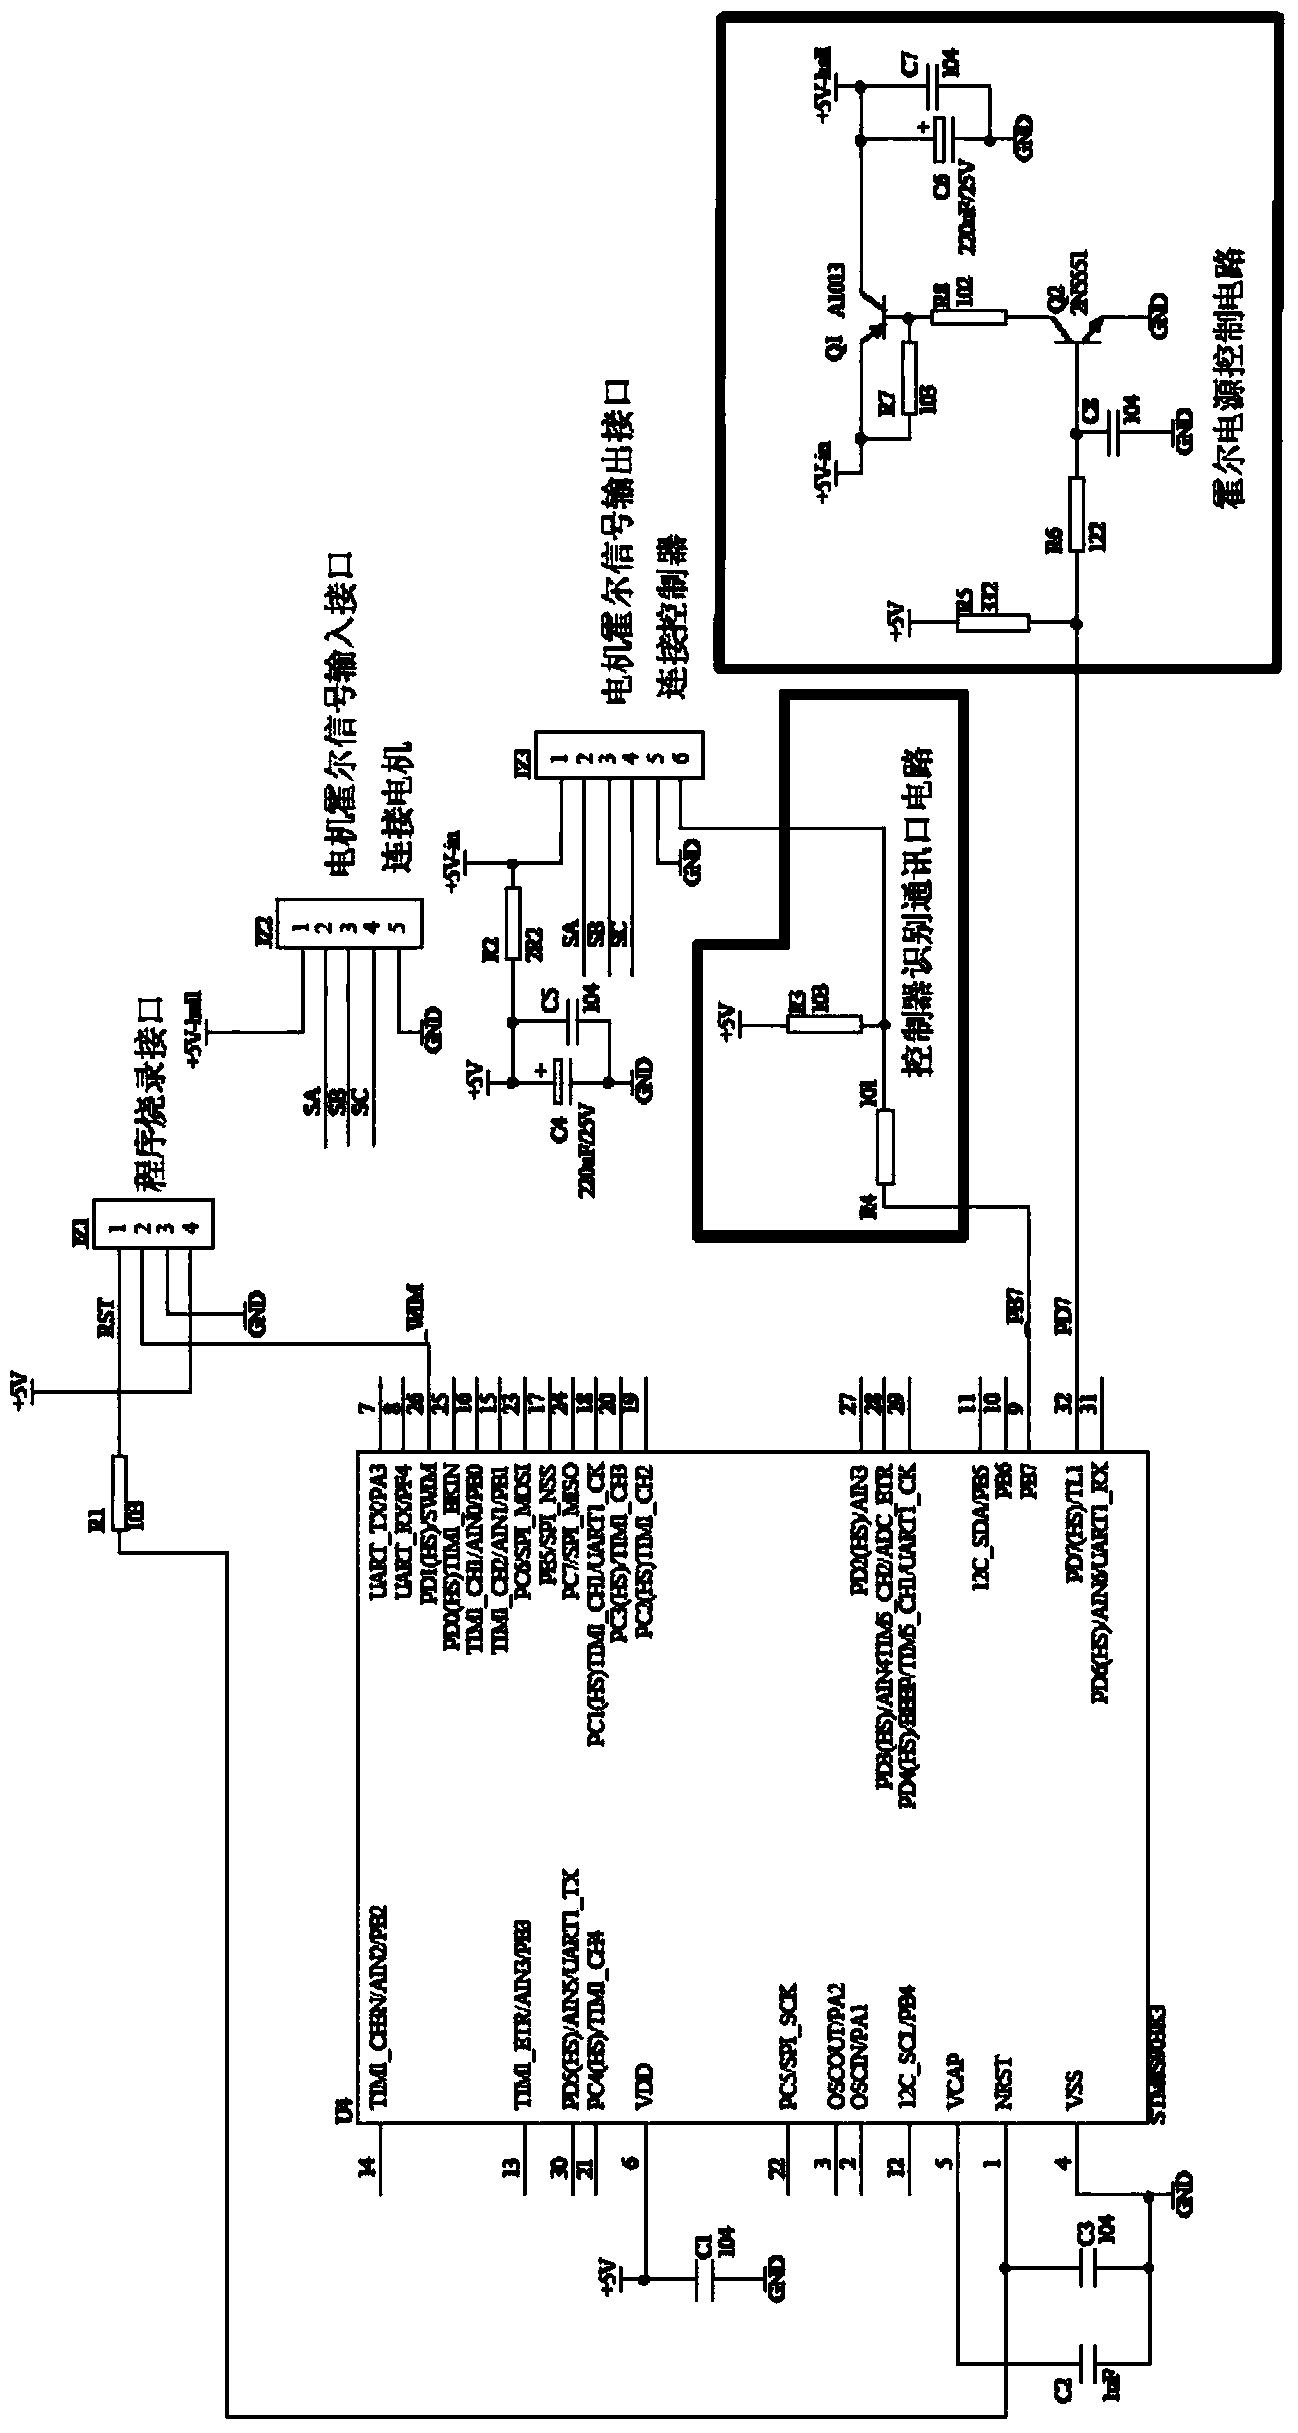 Anti-tampering motor controller and motor inter-identification system